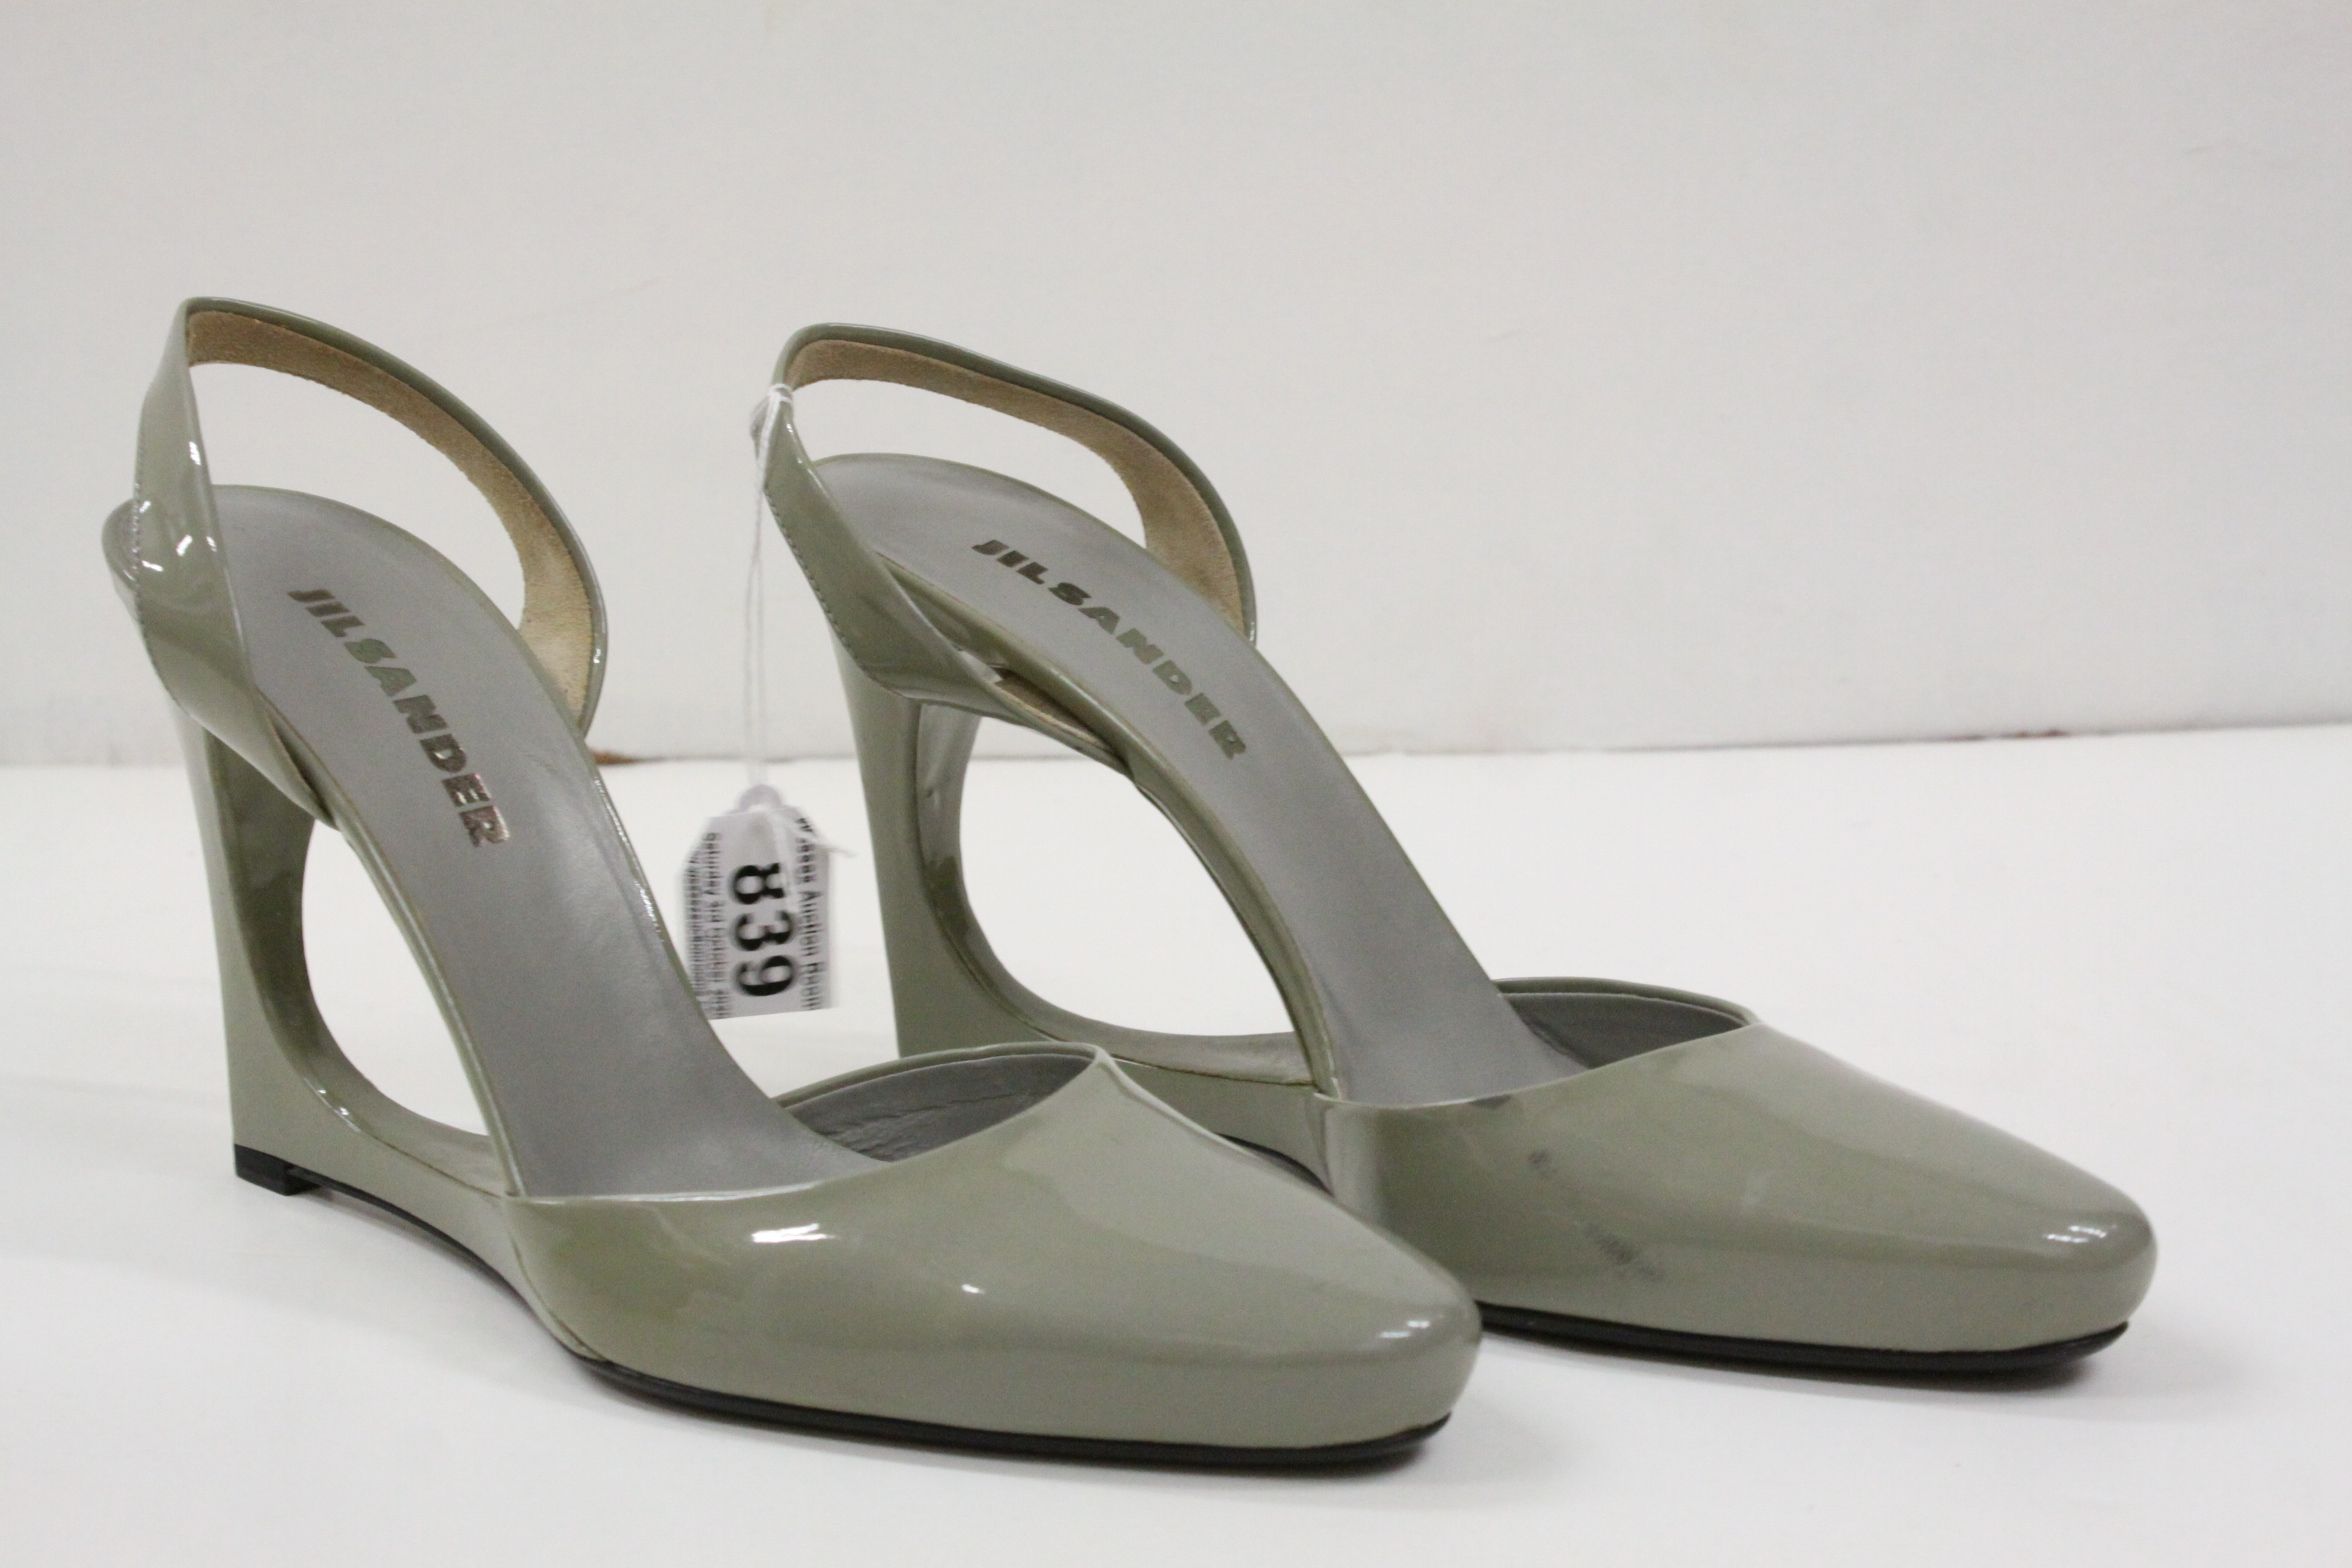 Pair of Jill Sander patent leather green-grey sling back shoes, elongated rounded toe, sculptural